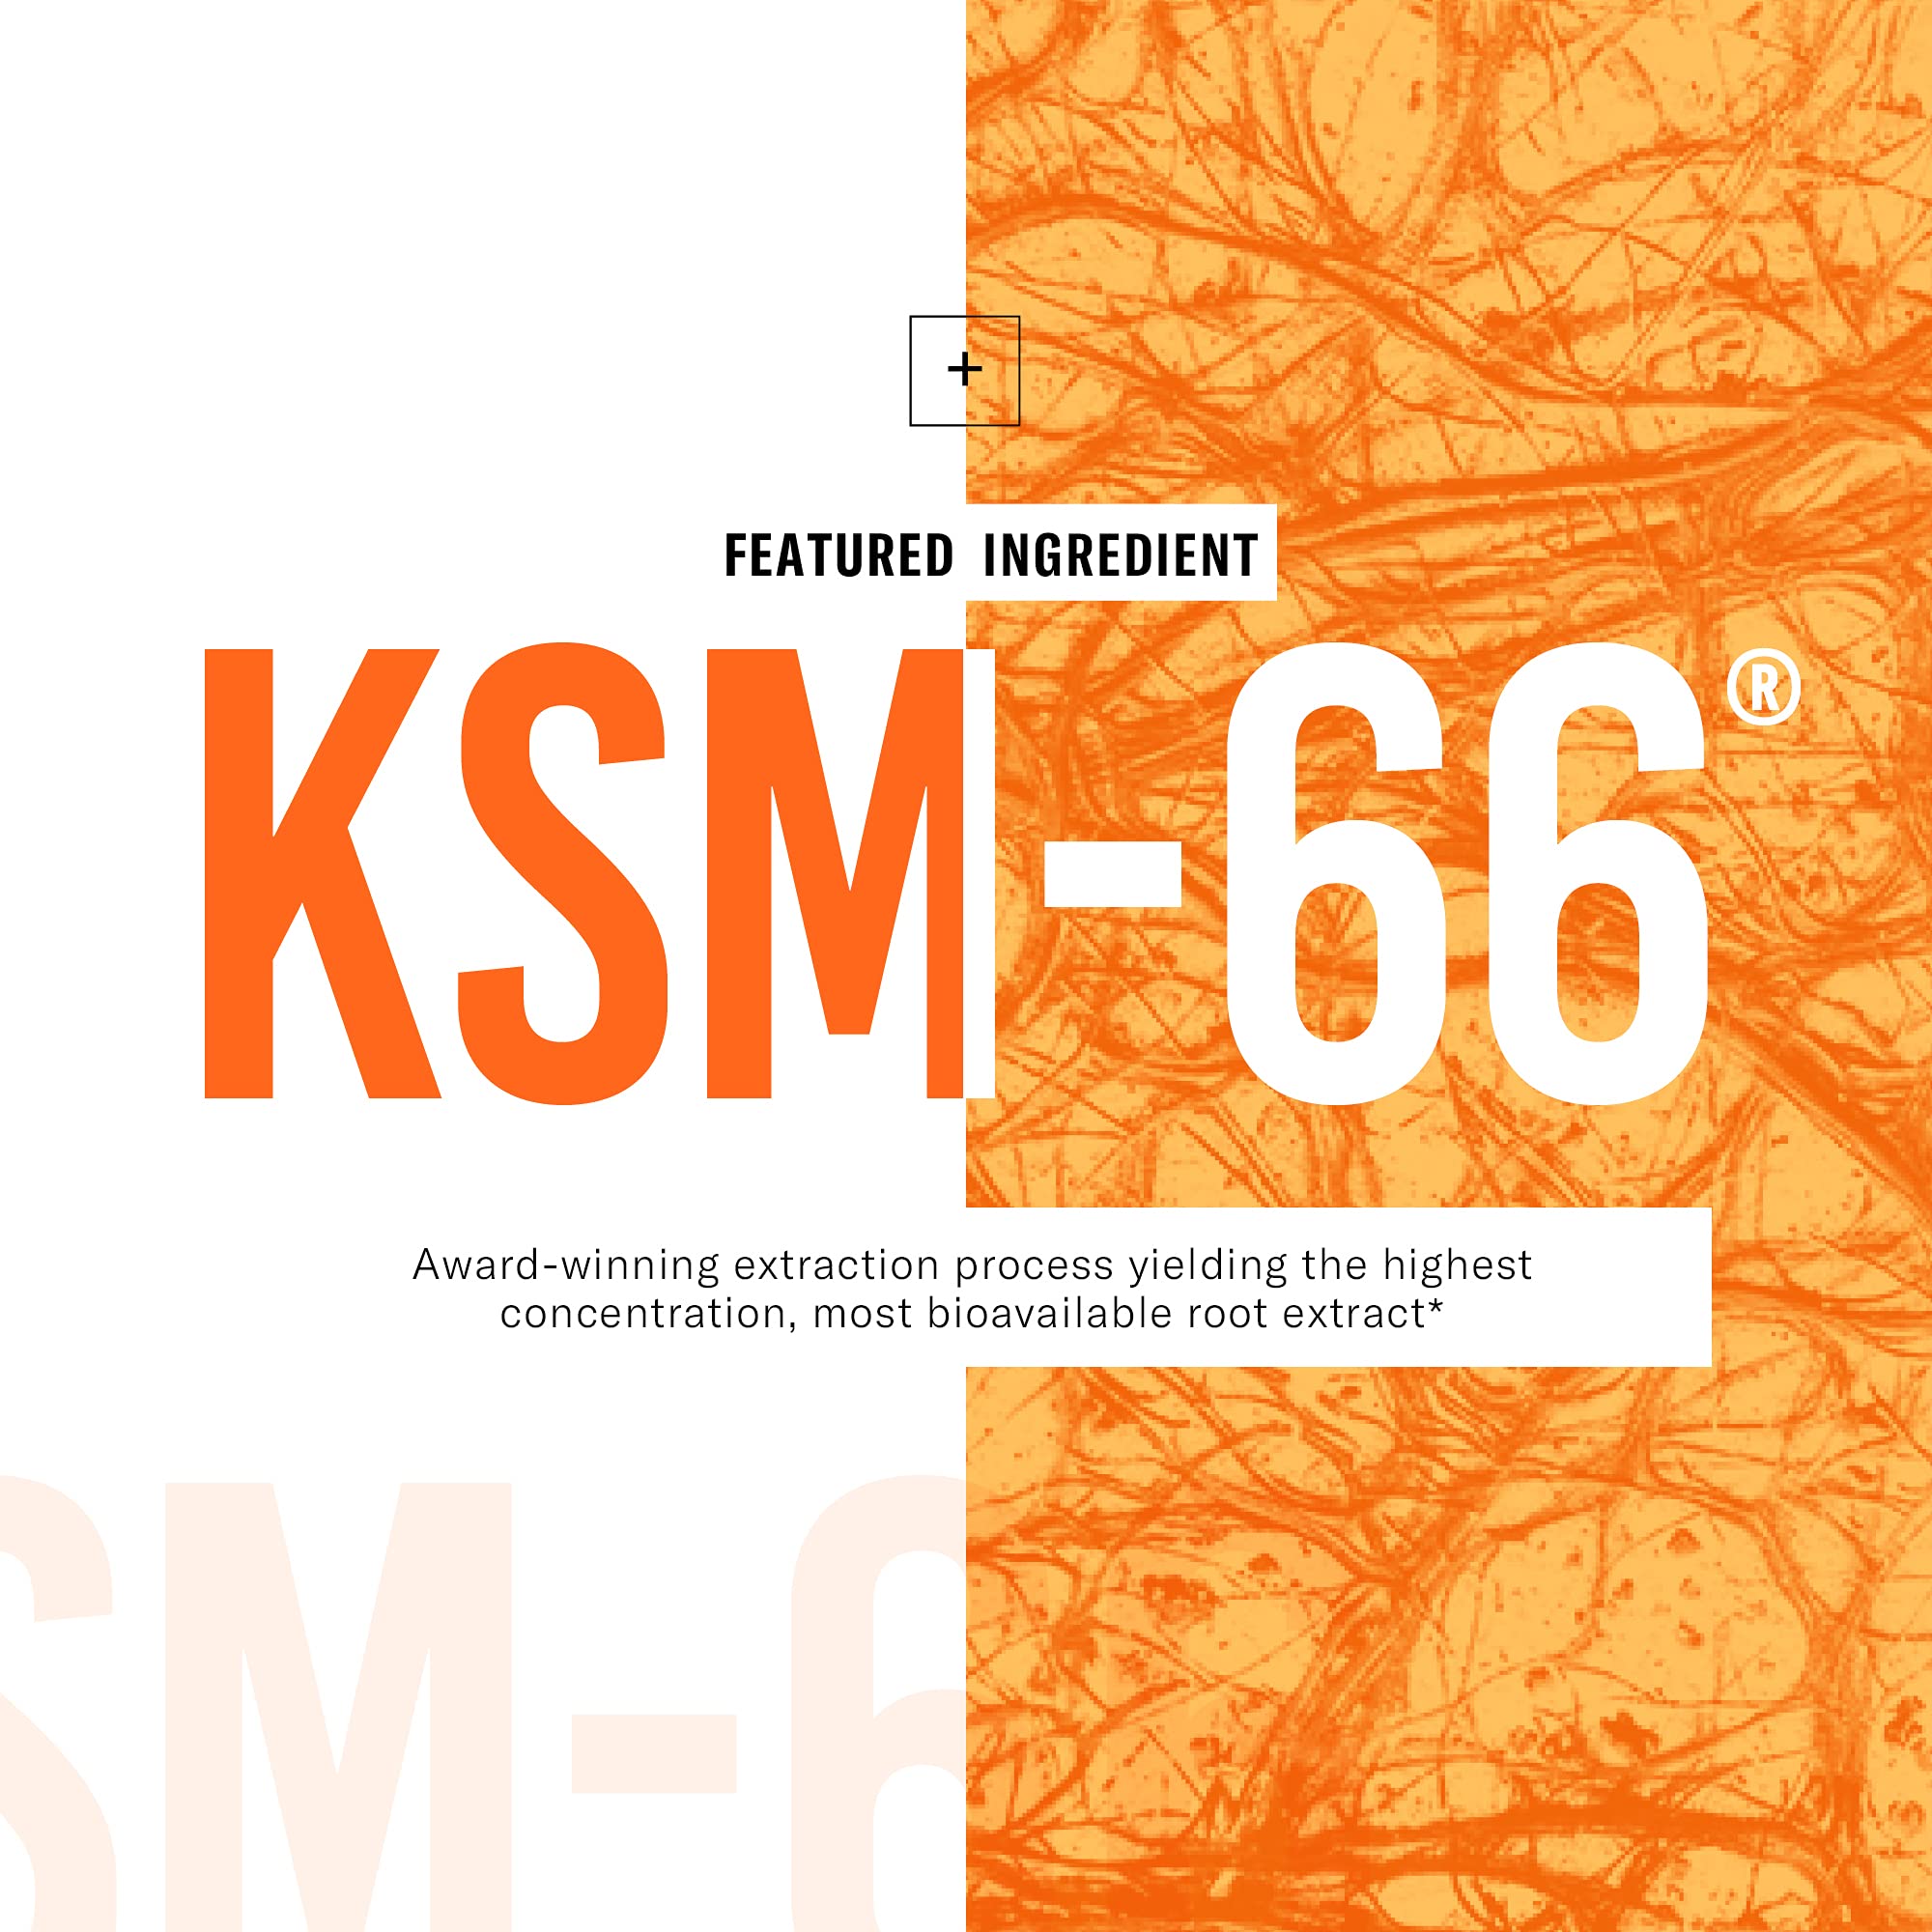 KSM-66 Ashwagandha Root Powder Extract - Stress, Mood, & Well Being Support - 1,000 MG of Clinically Studied KSM66 & Black Pepper for Maximum Absorption - 5% Withanolides - 60 Vegan Capsules